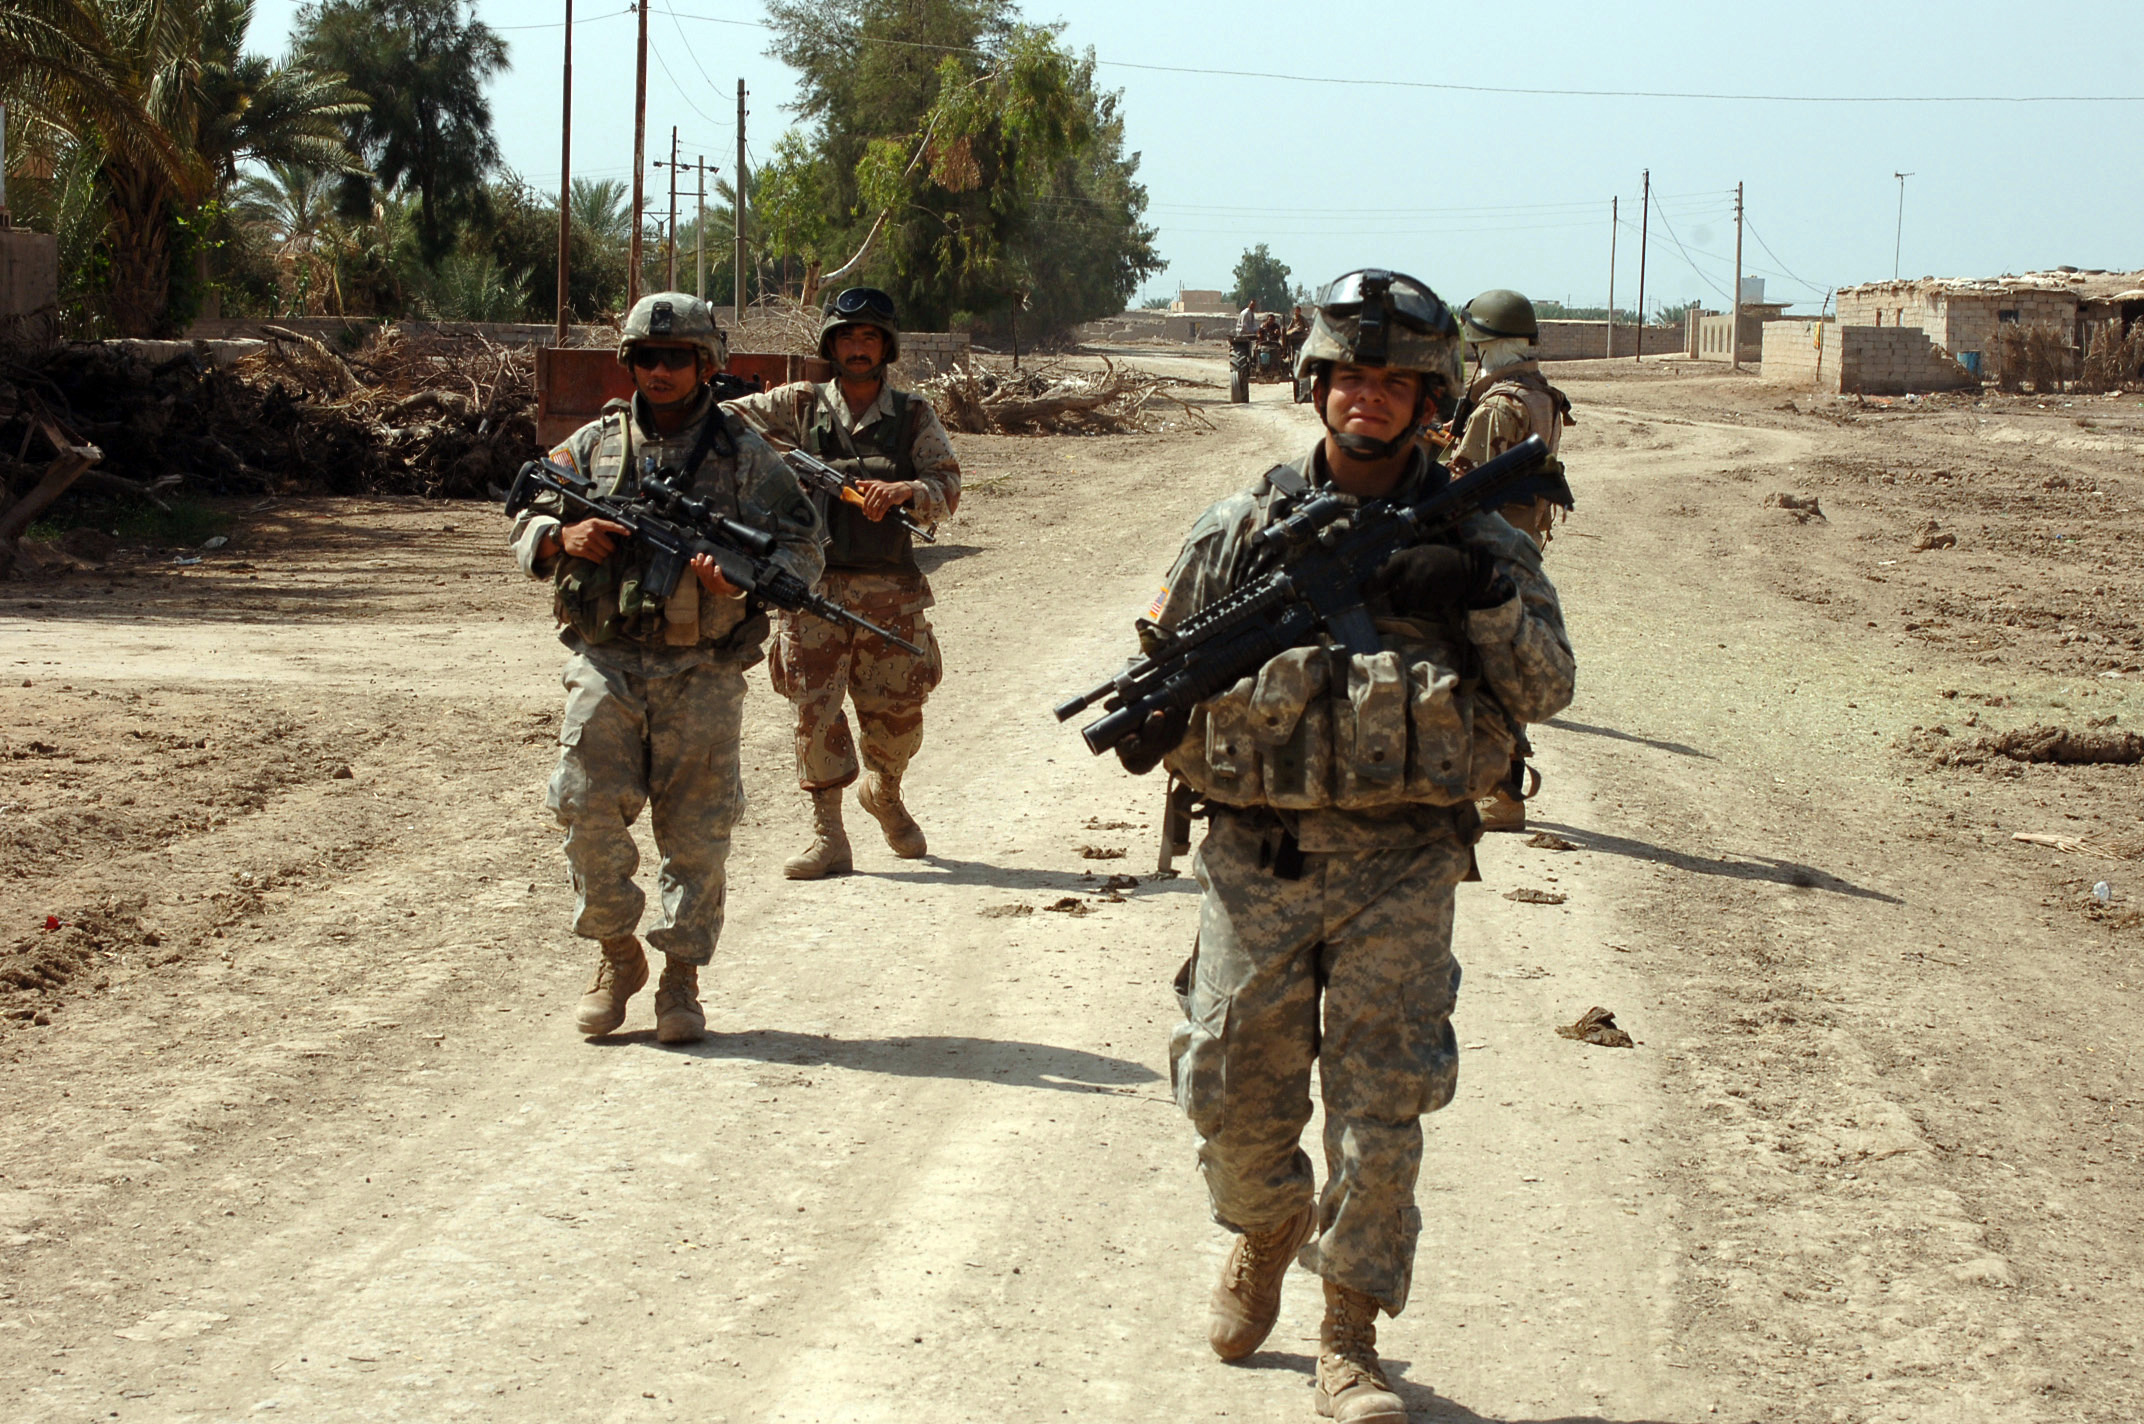 Members of B Company, 1-502nd Infantry Battalion, 101st Airborne Division conduct a patrol during Operation Desert Scorpion. The operation is an effort to disrupt terrorist activities near Rushdie Mula, Iraq. The photo was taken on the afternoon of April 20, 2006 as part of Operation Iraqi Freedom. (U.S. Army photo by Sgt. 1st Class David D. Isakson) (Released)